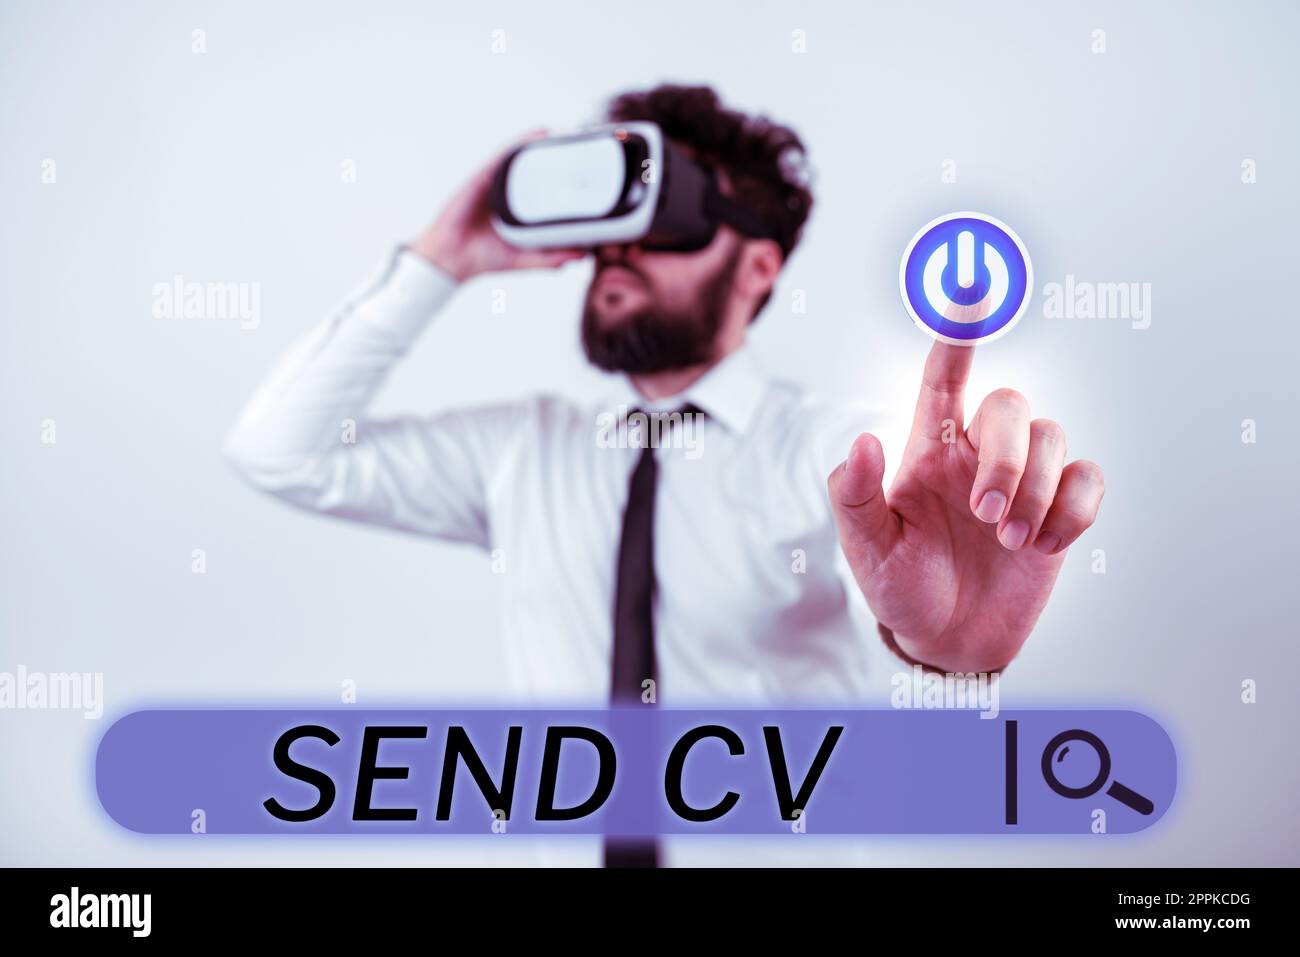 Sign displaying Send Cv. Business approach Give resume curriculum vitae for applying to job Recruitment Stock Photo